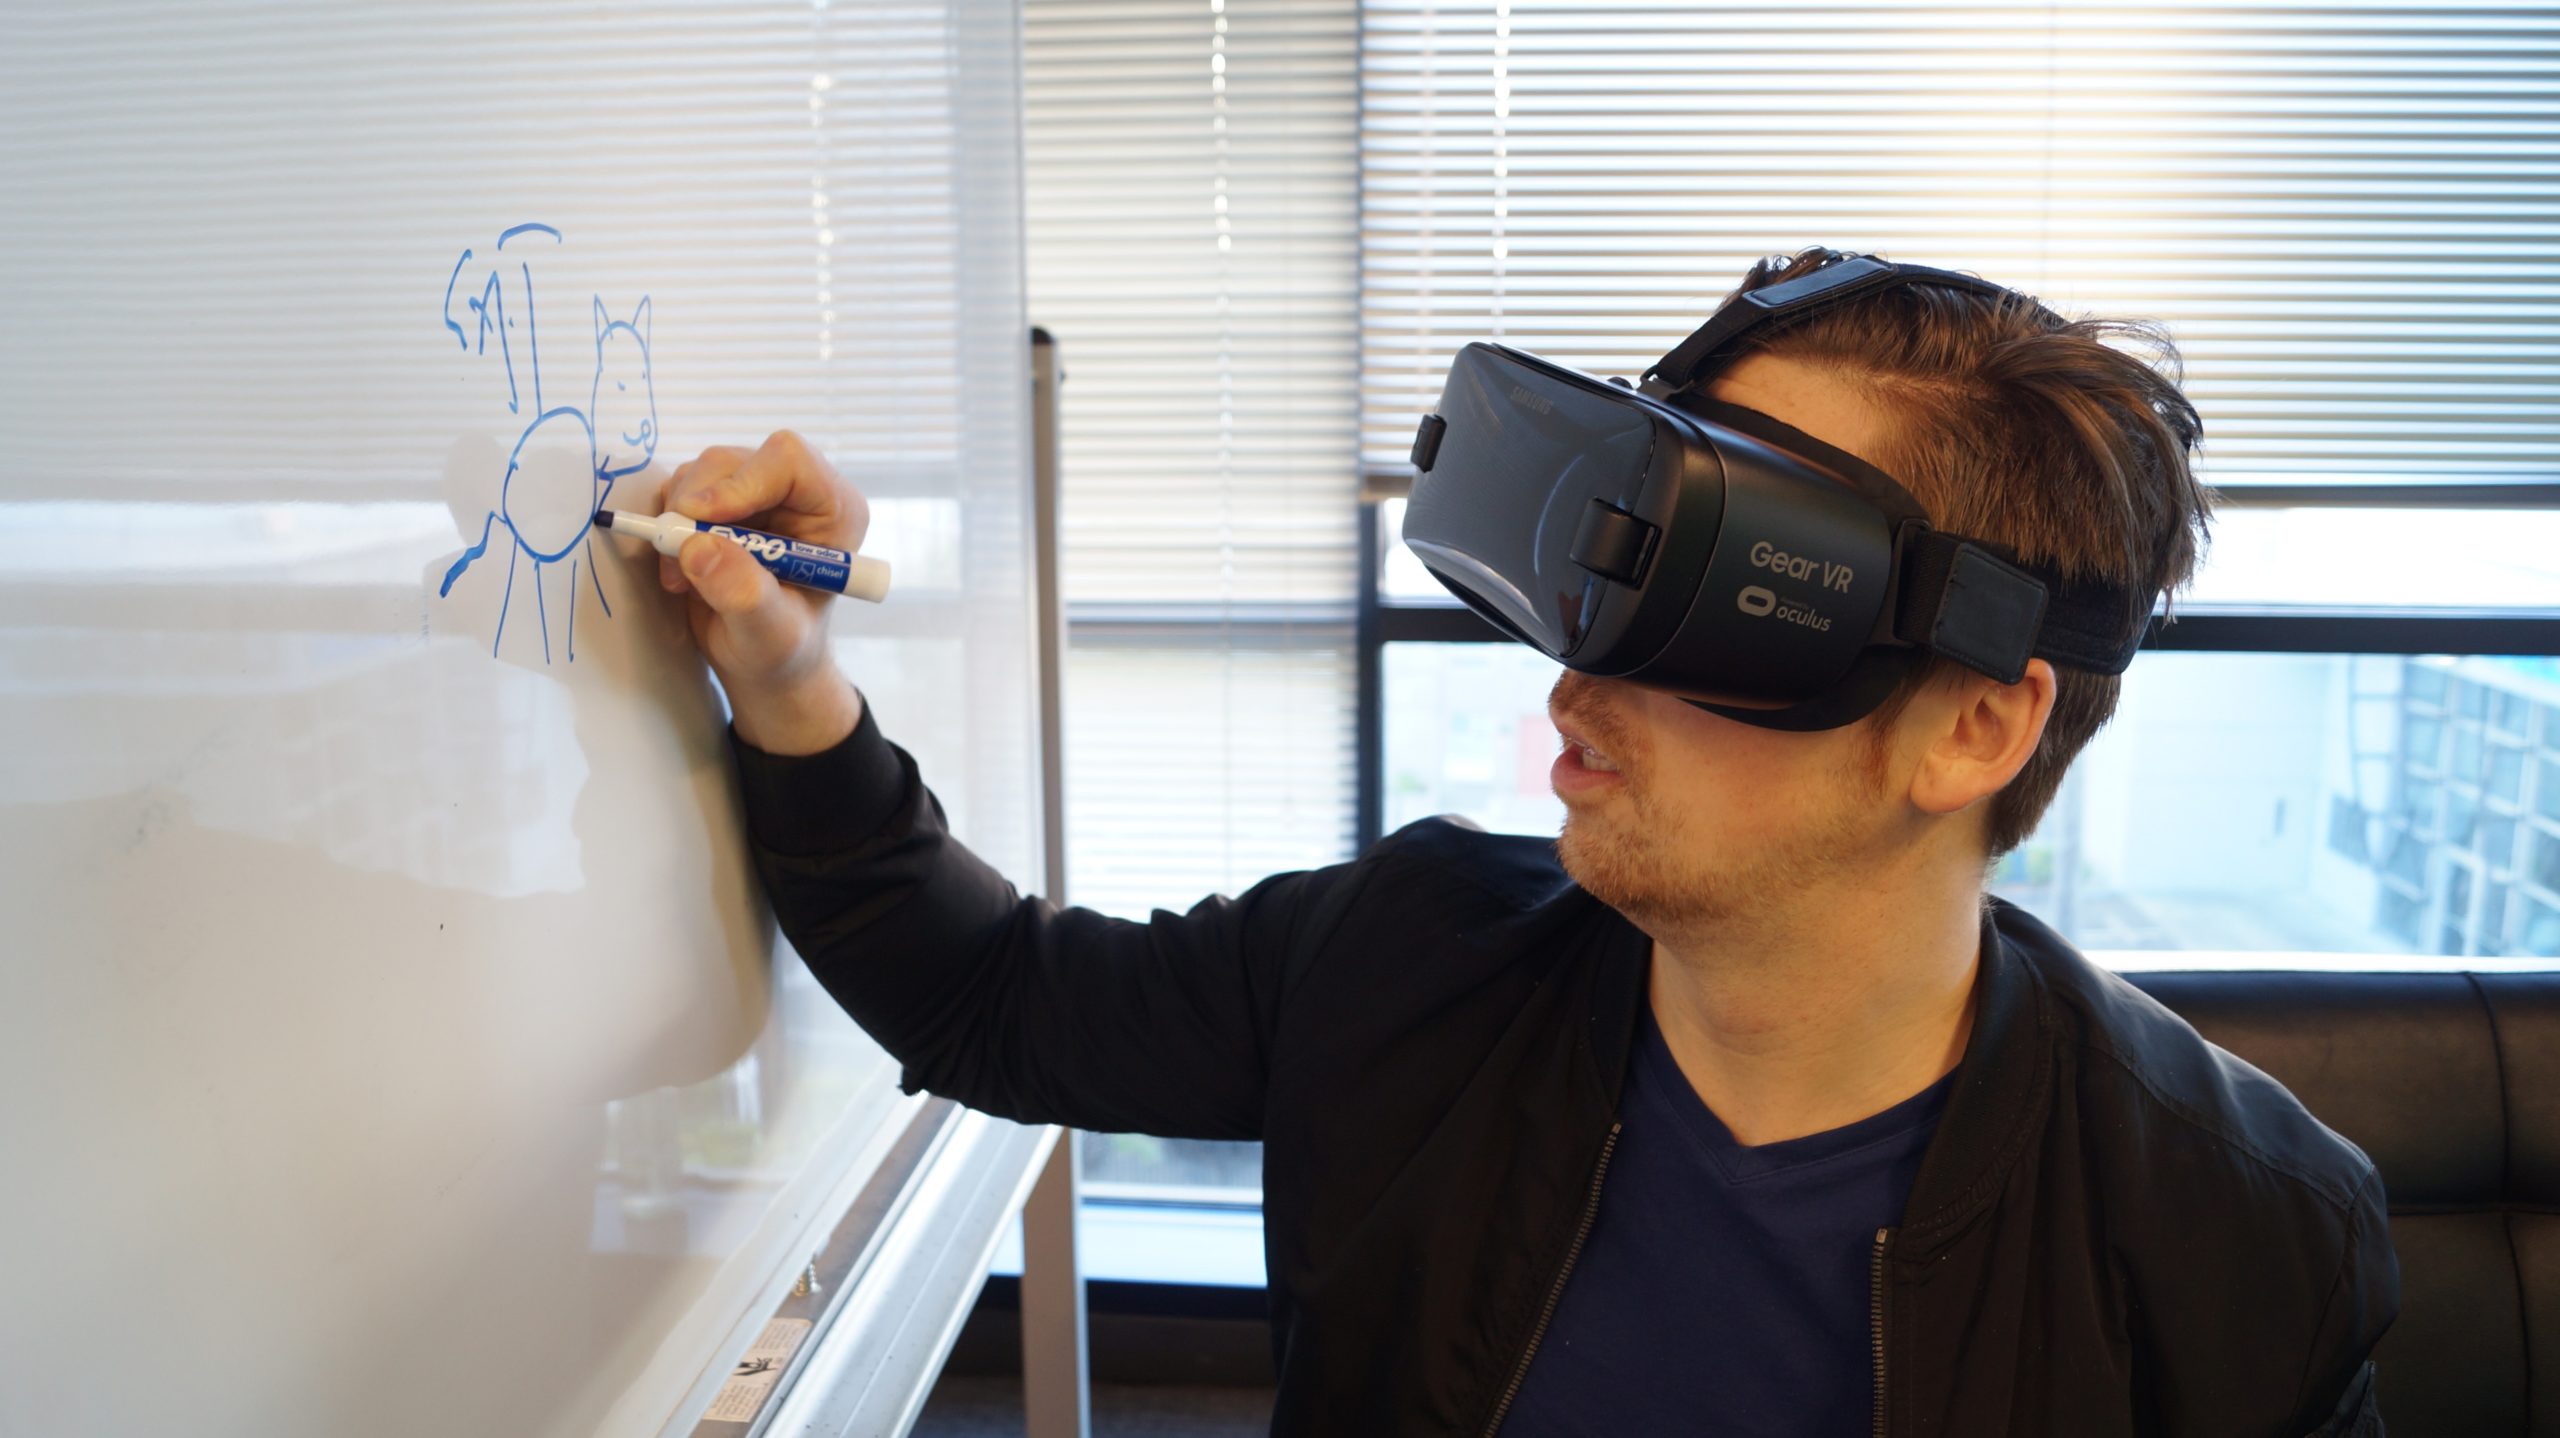 A man wearing a VR headset while writing on a whiteboard.